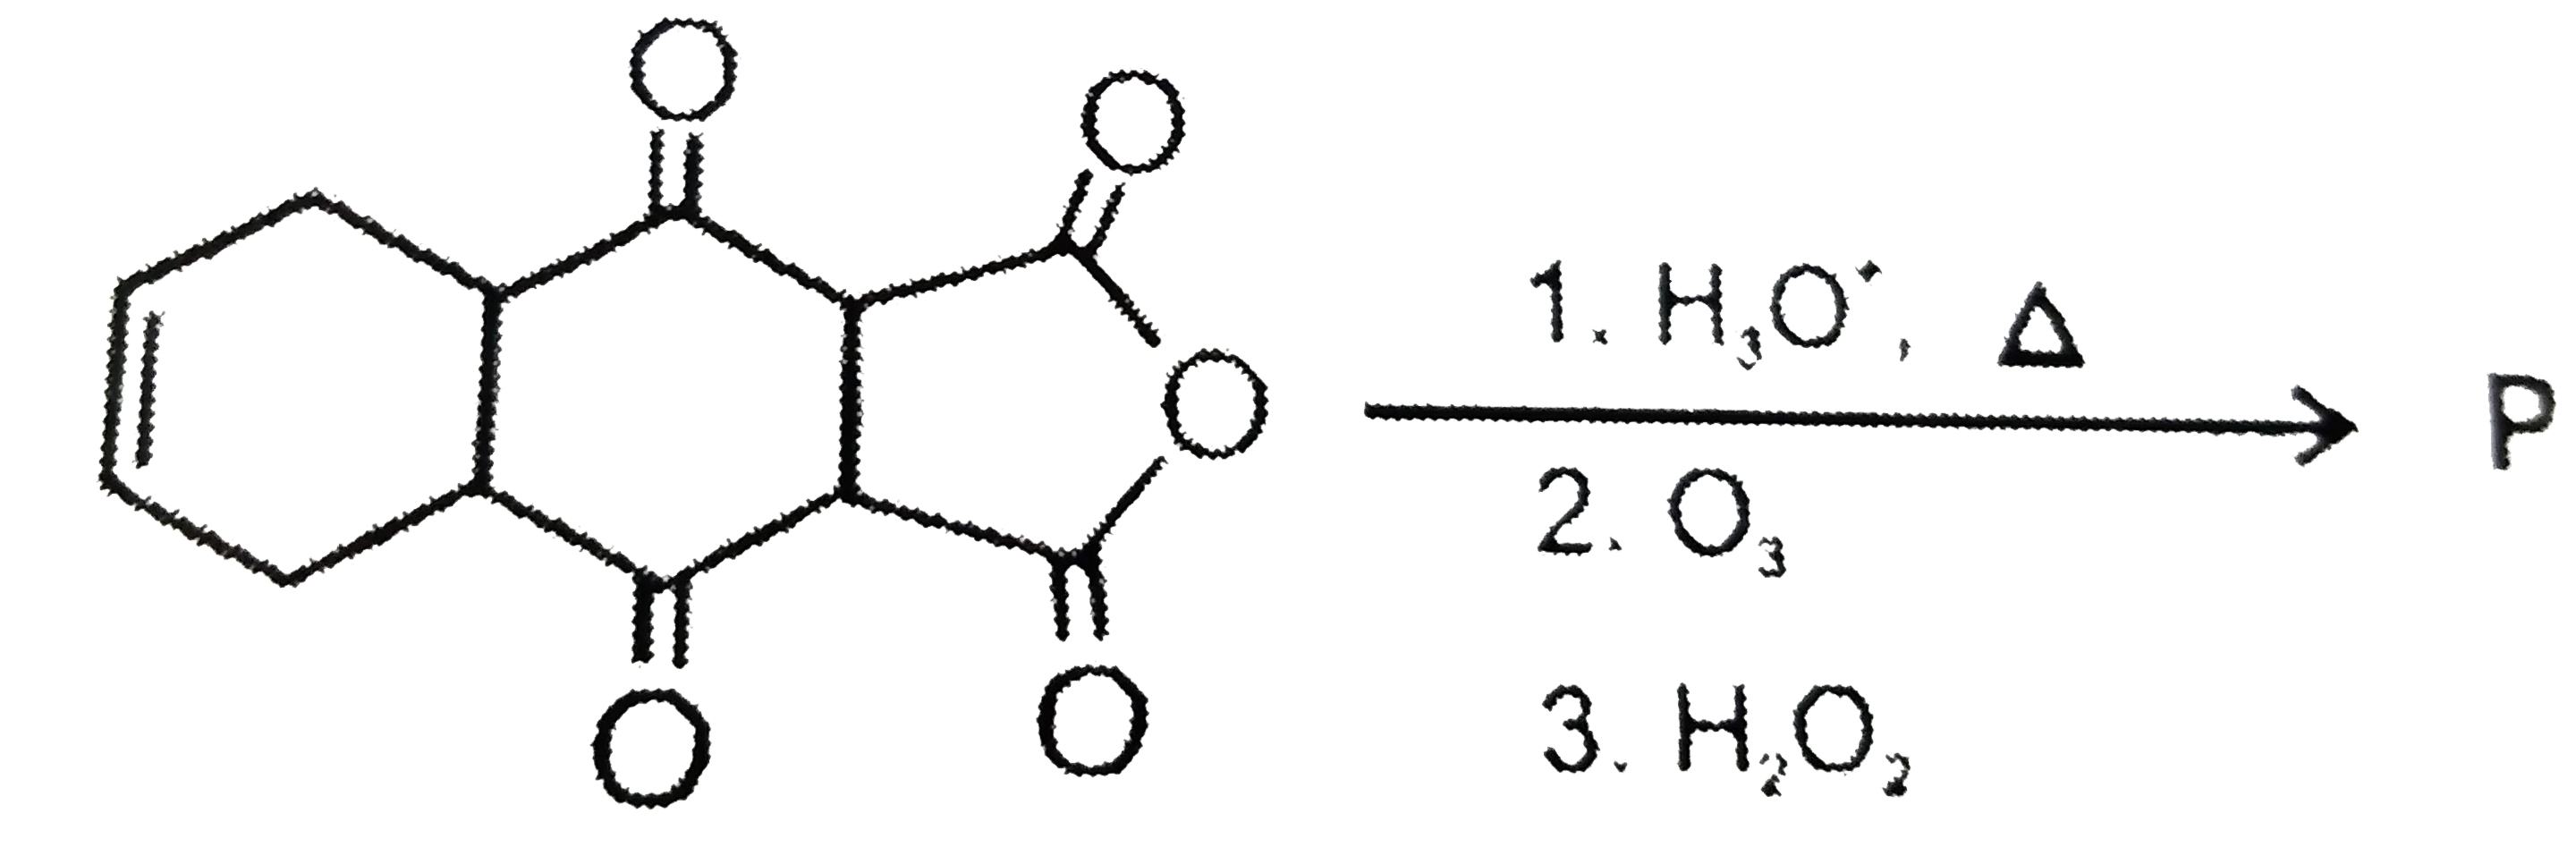 The total number of carboxylic acid groups in the product P is